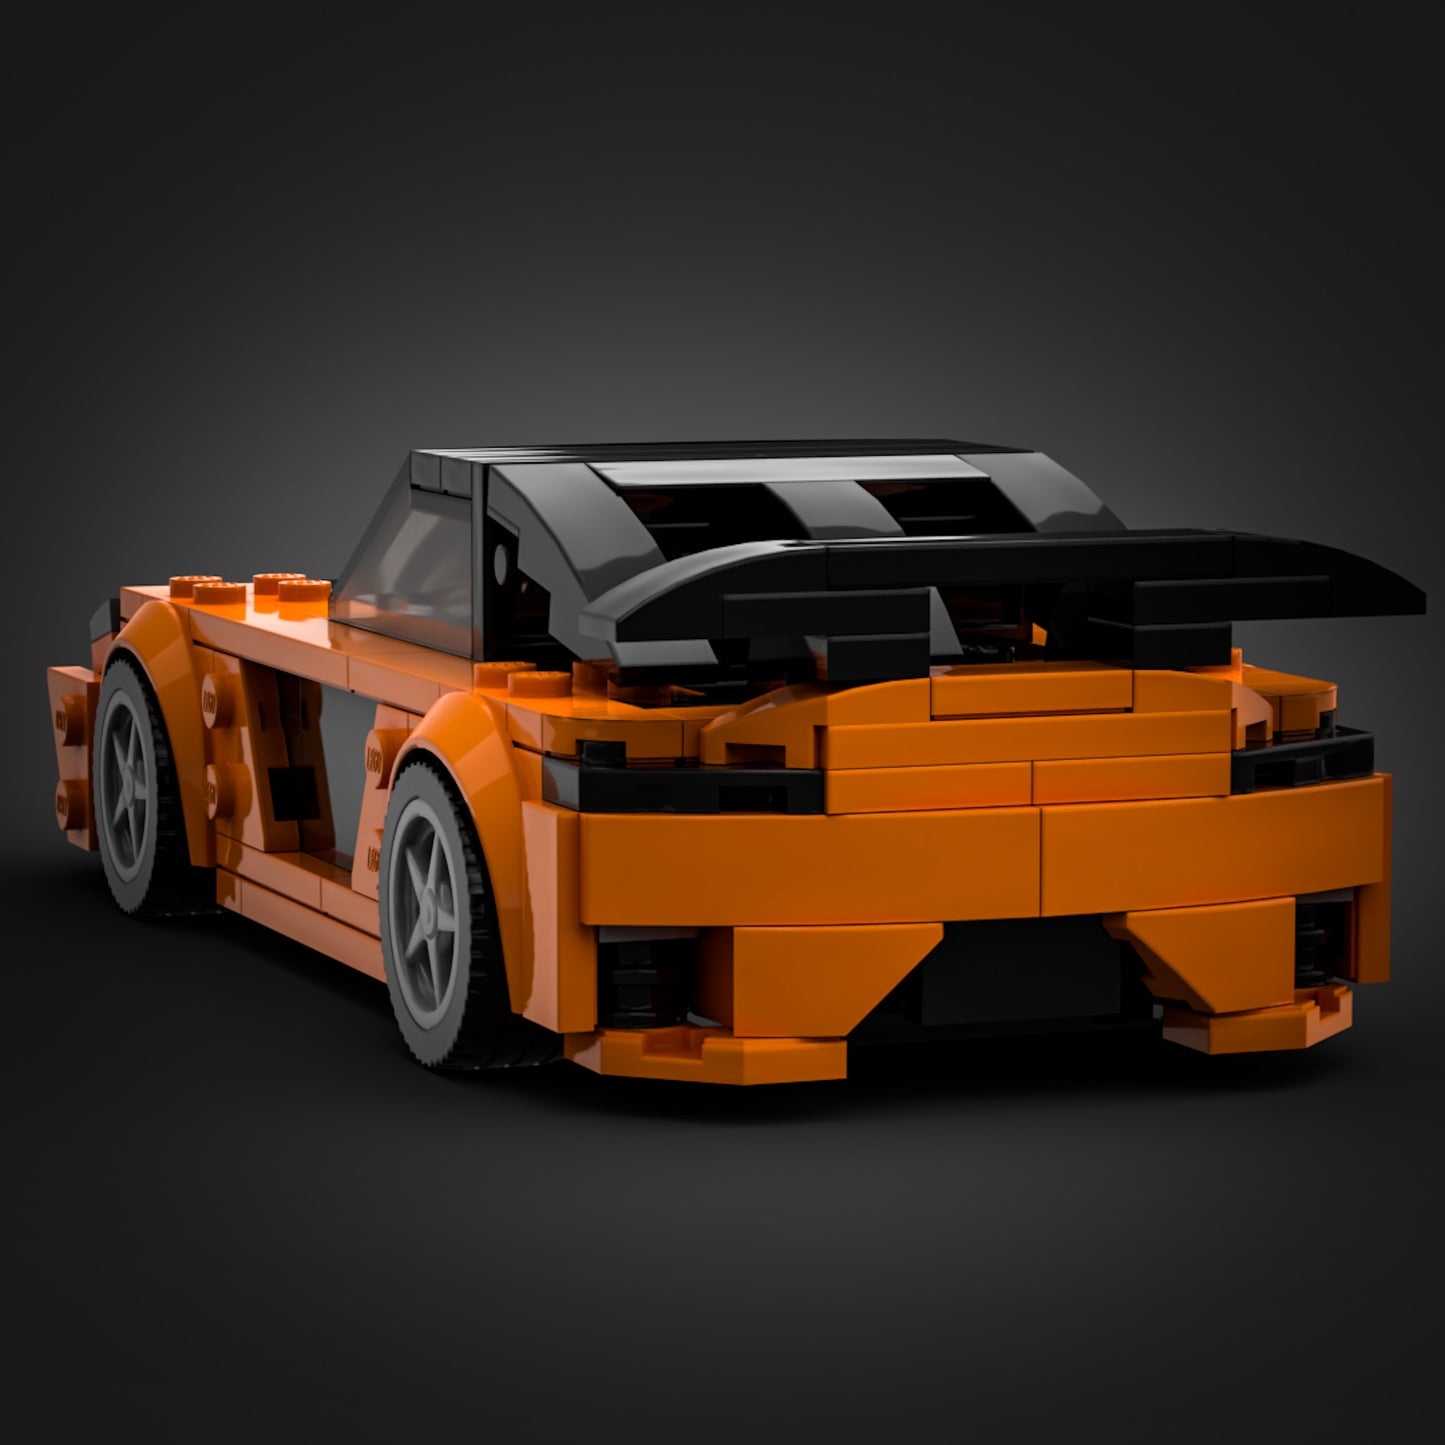 Inspired by Fast and Furious Veilside Mazda RX7 (instructions)